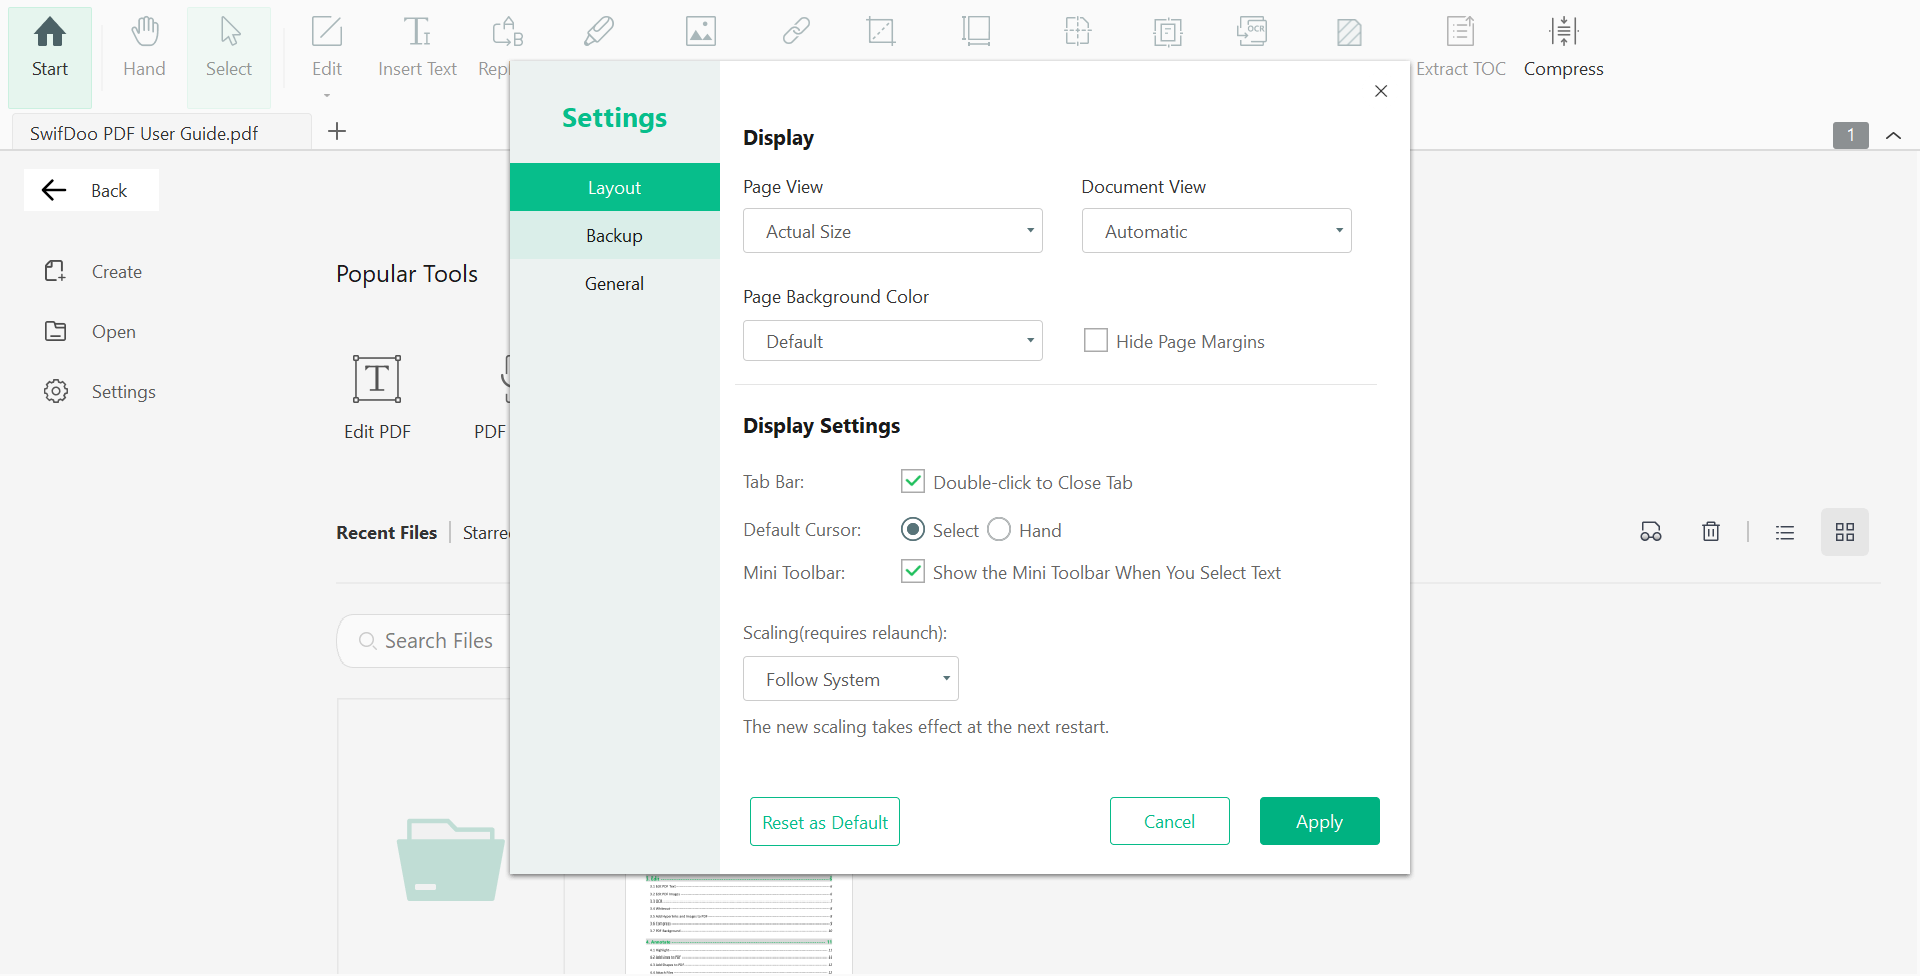 SwifDoo layout settings preview image